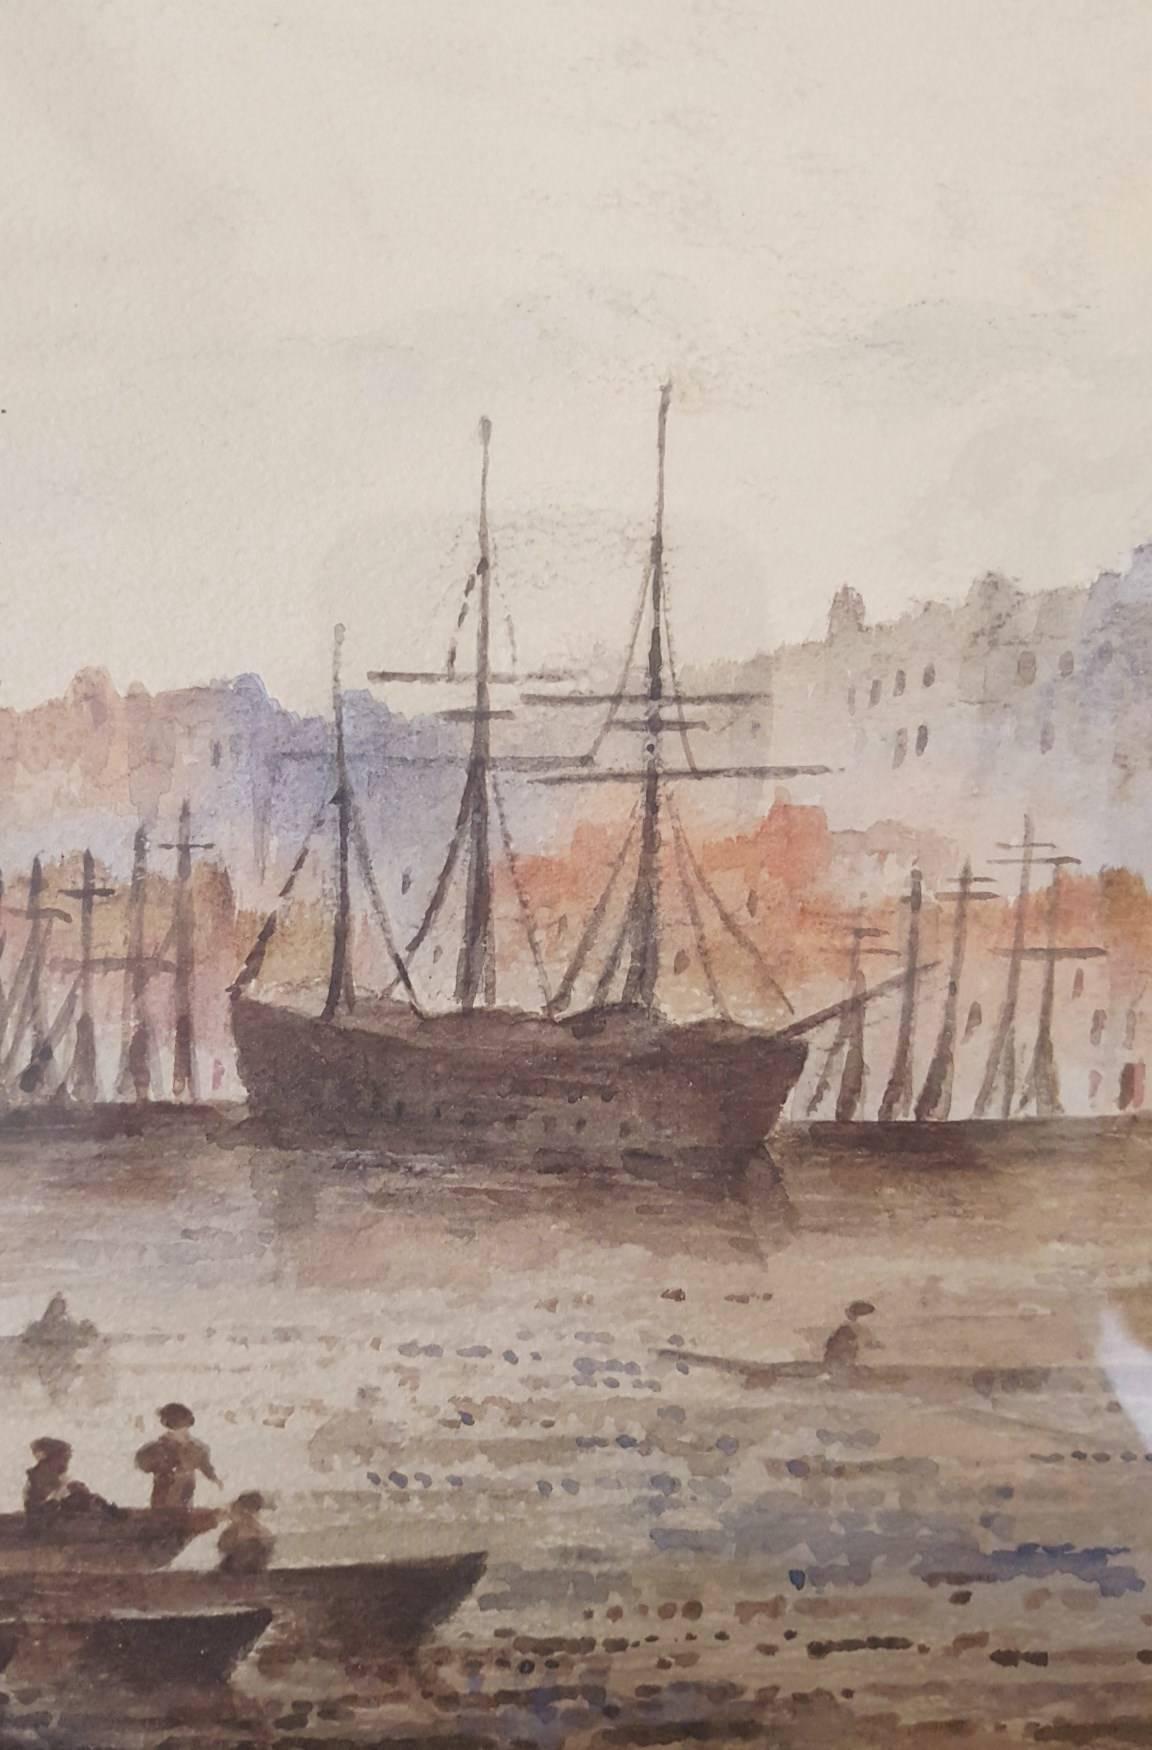 An original watercolor titled "Tynemouth, England", 1888. Titled and dated by the anonymous artist lower right. A charming watercolor painting of ships and people watching over the River Tyne. There is good detail of the buildings standing